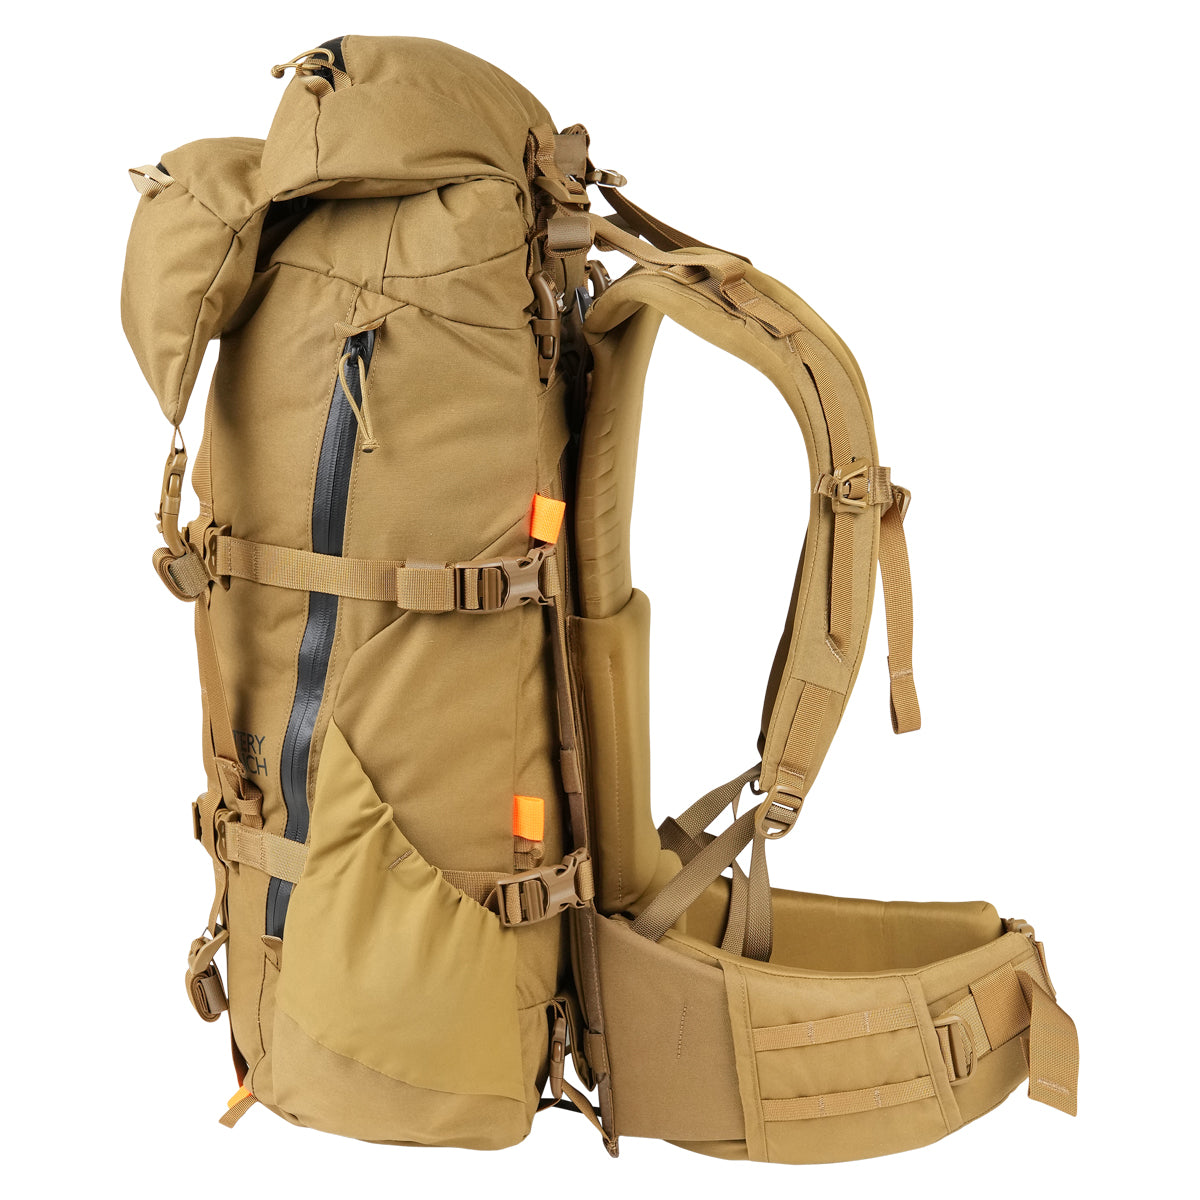 Mystery Ranch Metcalf 50 Backpack in Buckskin by GOHUNT | Mystery Ranch - GOHUNT Shop